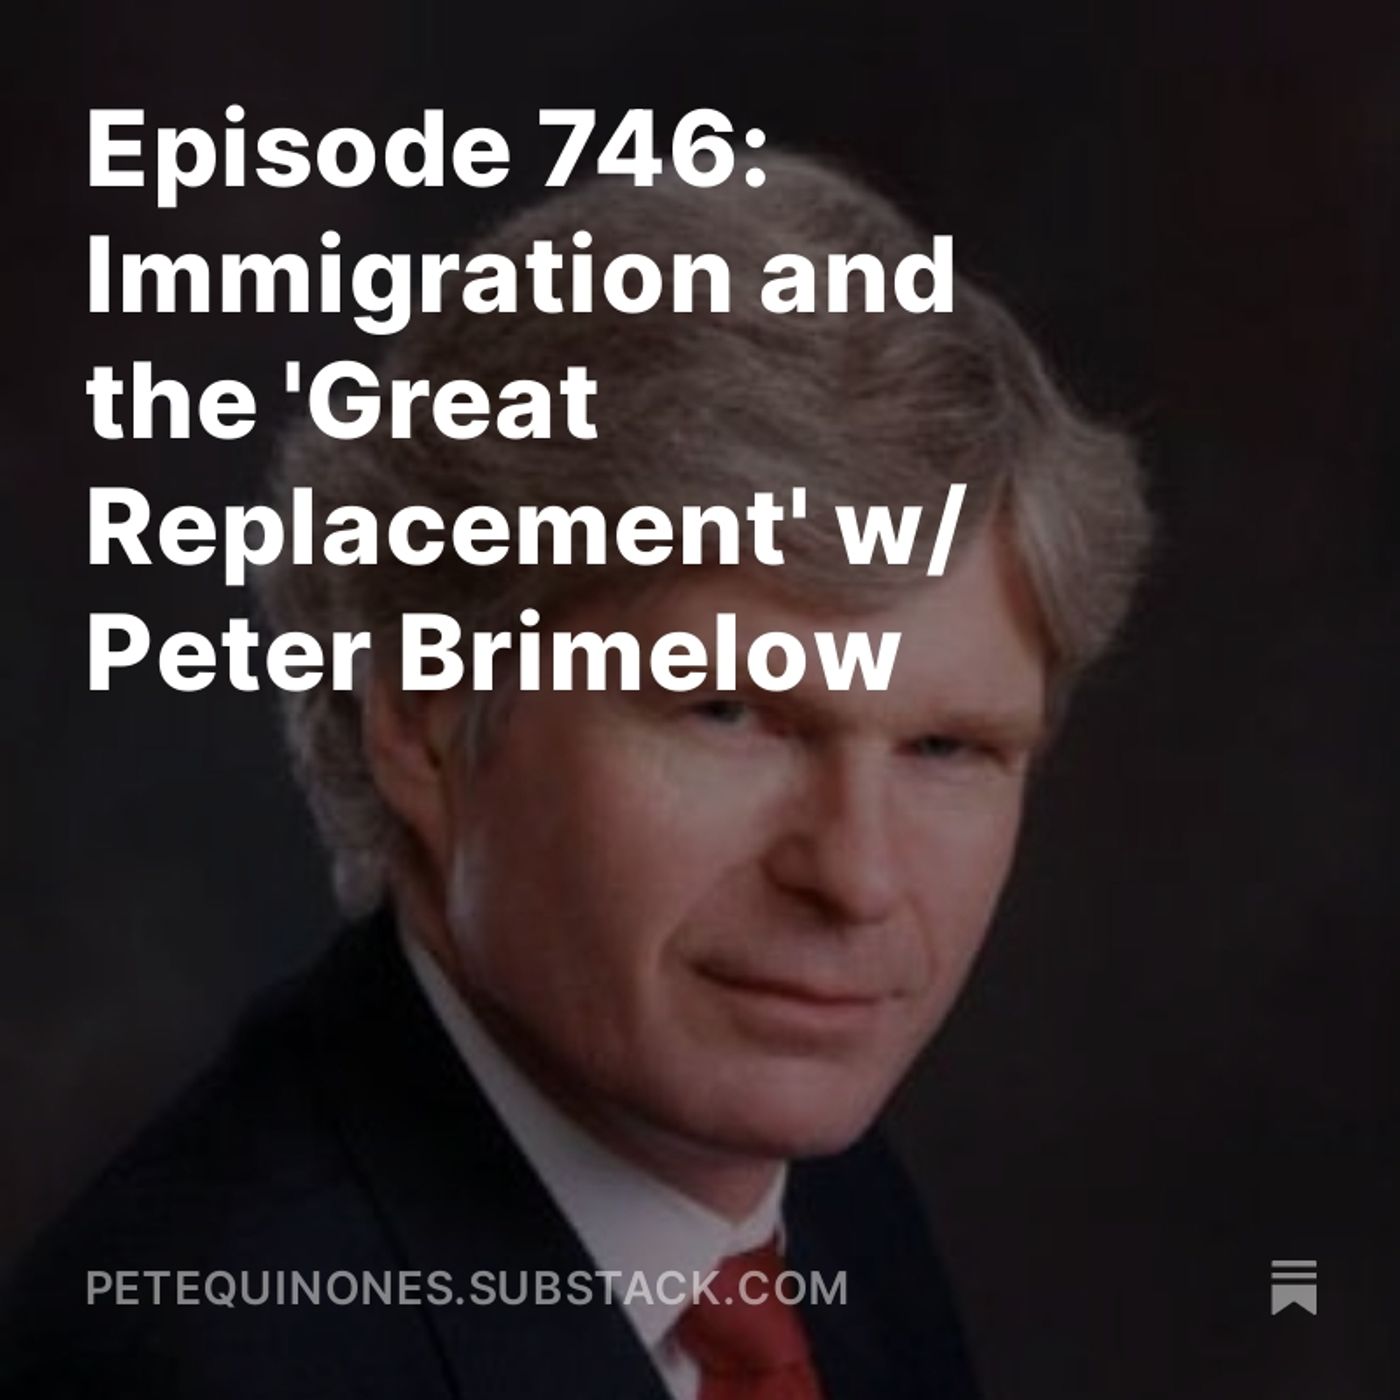 Episode 746: Immigration and the ’Great Replacement’ w/ Peter Brimelow